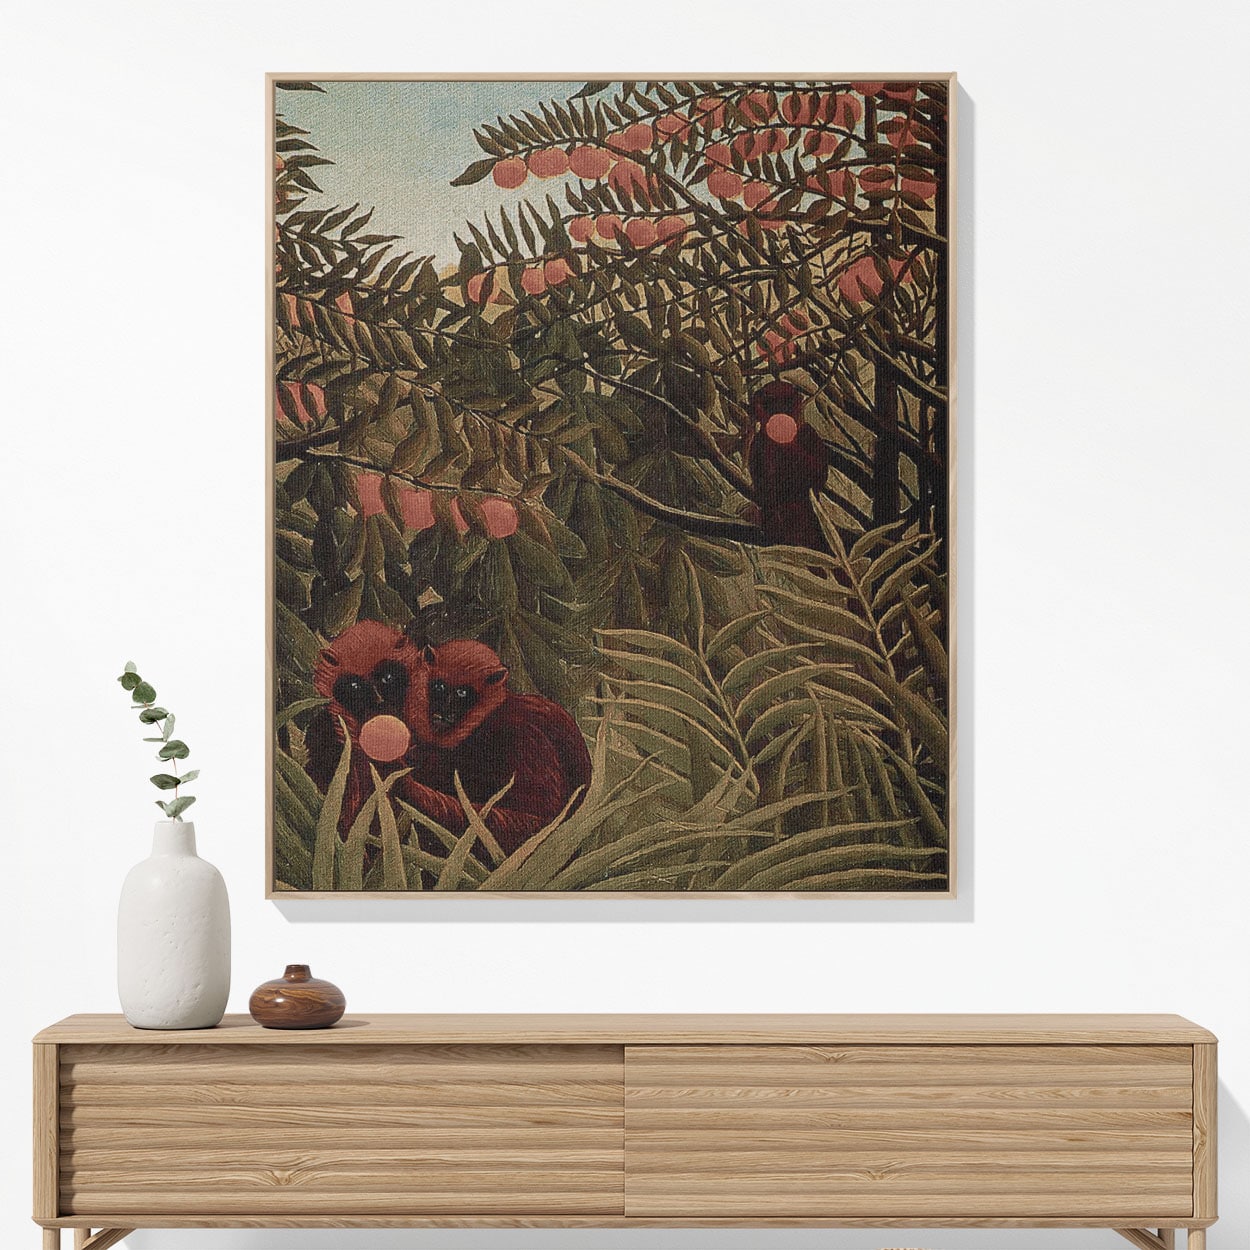 Vintage Tropical Woven Blanket Woven Blanket Hanging on a Wall as Framed Wall Art